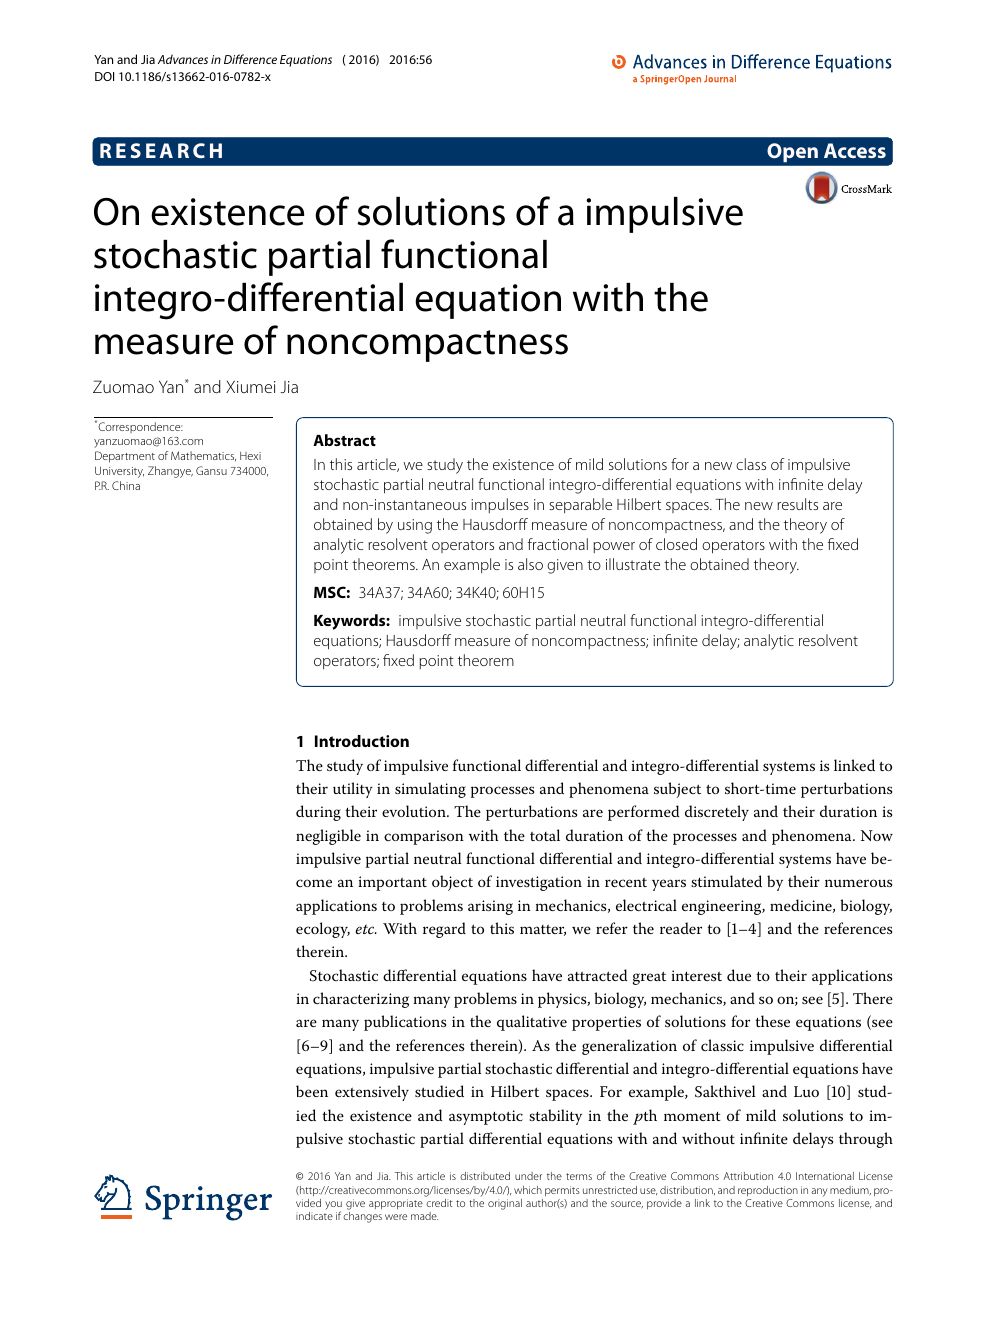 On Existence Of Solutions Of A Impulsive Stochastic Partial Functional Integro Differential Equation With The Measure Of Noncompactness Topic Of Research Paper In Mathematics Download Scholarly Article Pdf And Read For Free